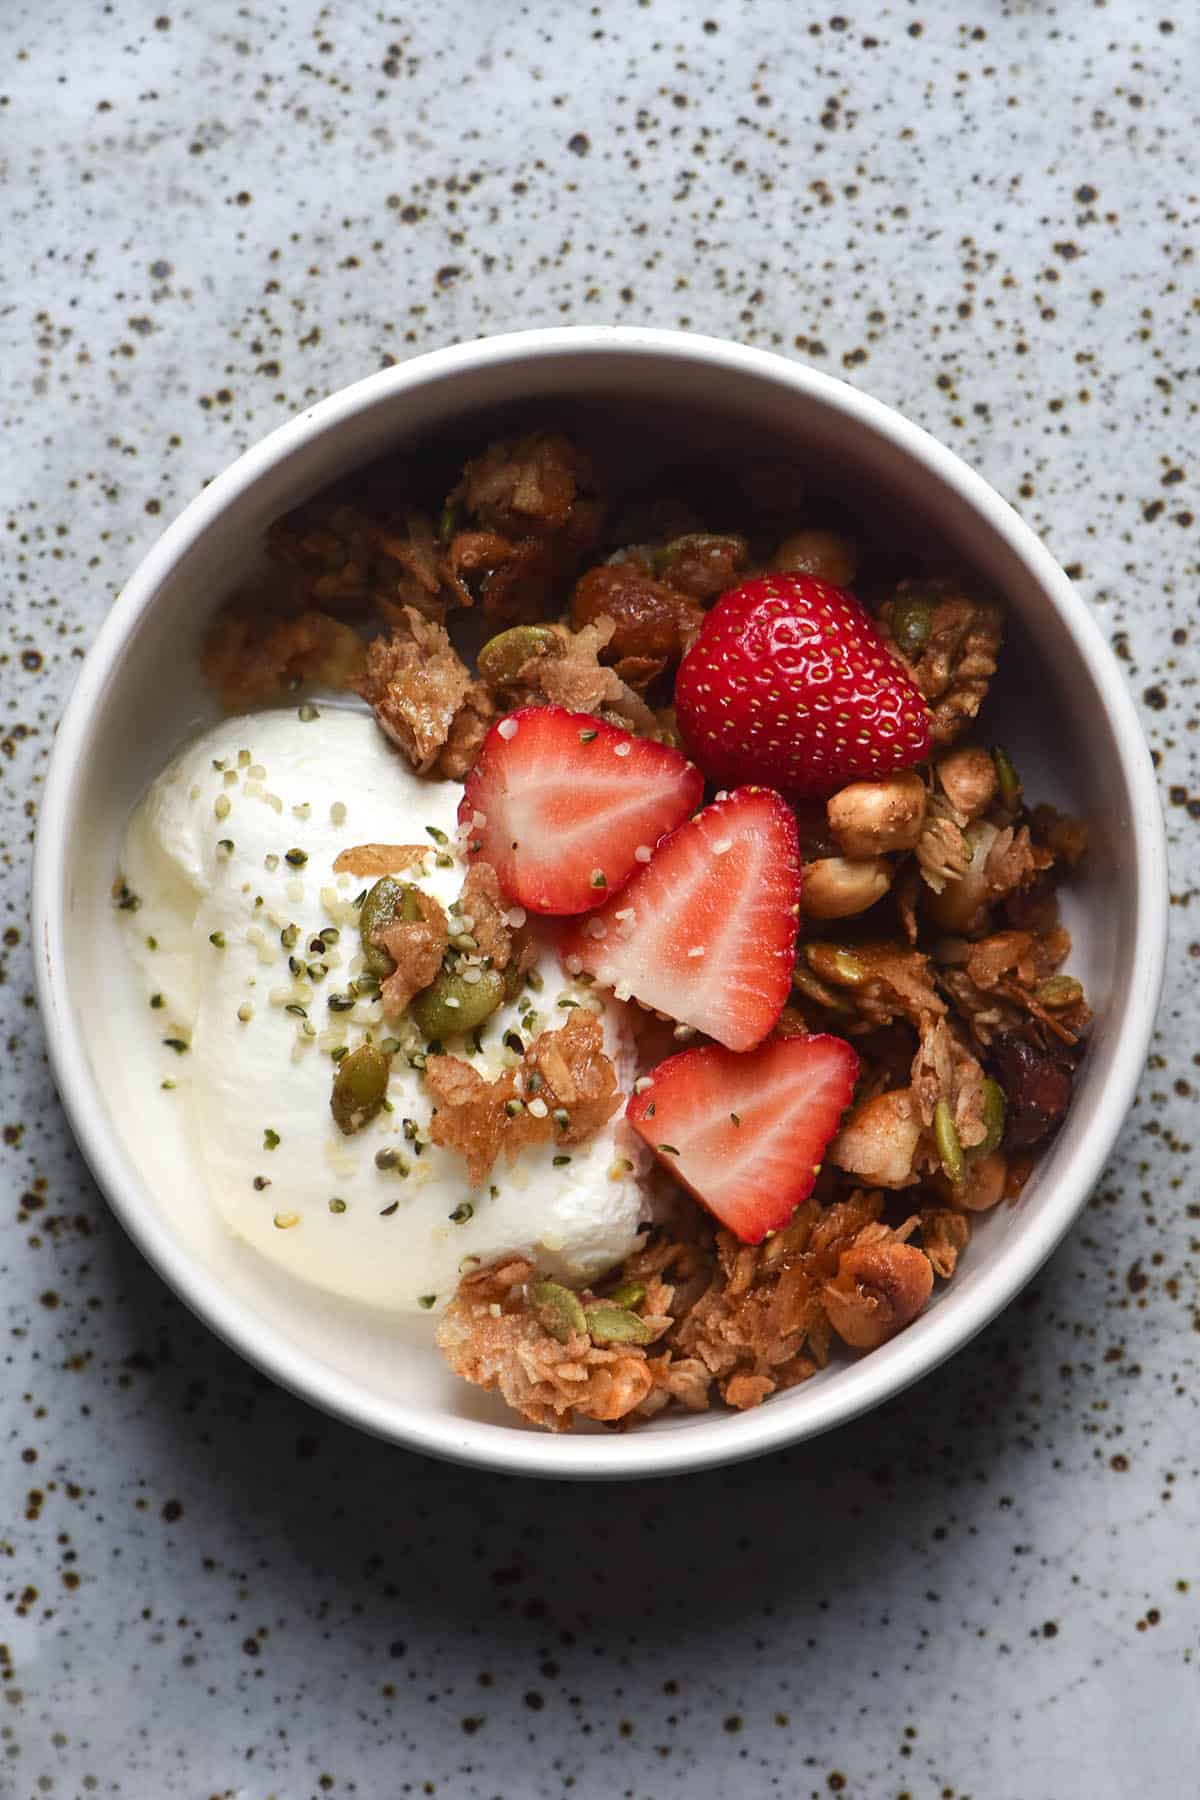 An aerial image of a white bowl filled with yoghurt, sliced strawberries and gluten free granola. The bowl sits atop a white speckled ceramic plate.